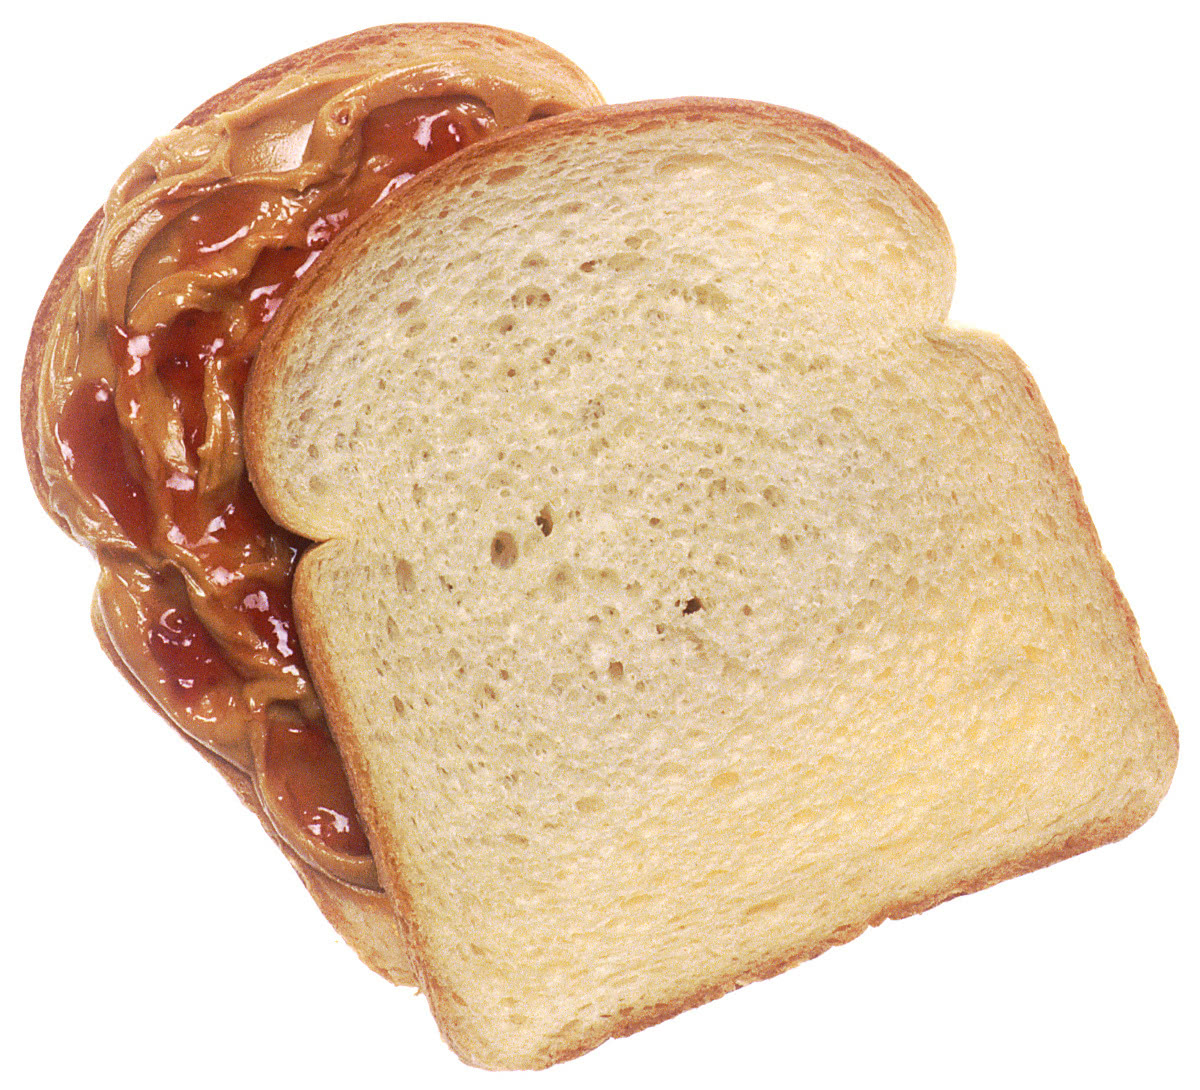 peanut butter and jelly sandwich large